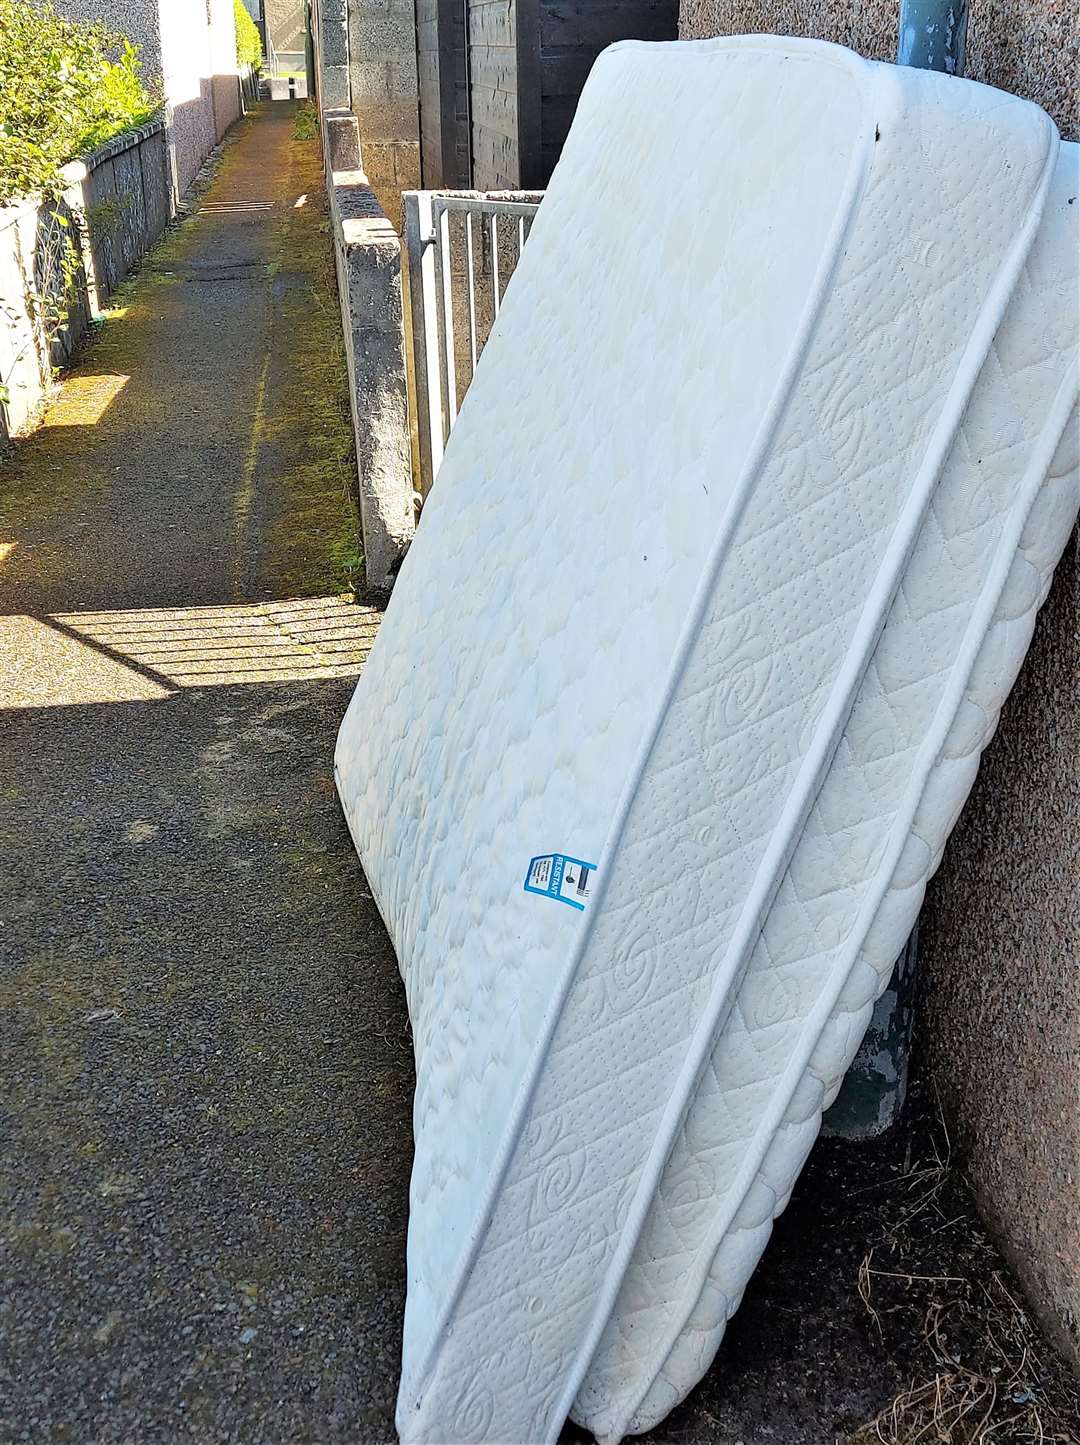 This double mattress has been blocking a narrow entry between Queen’s Terrace and Oldfield Terrace for over a month despite the council being informed by several locals.